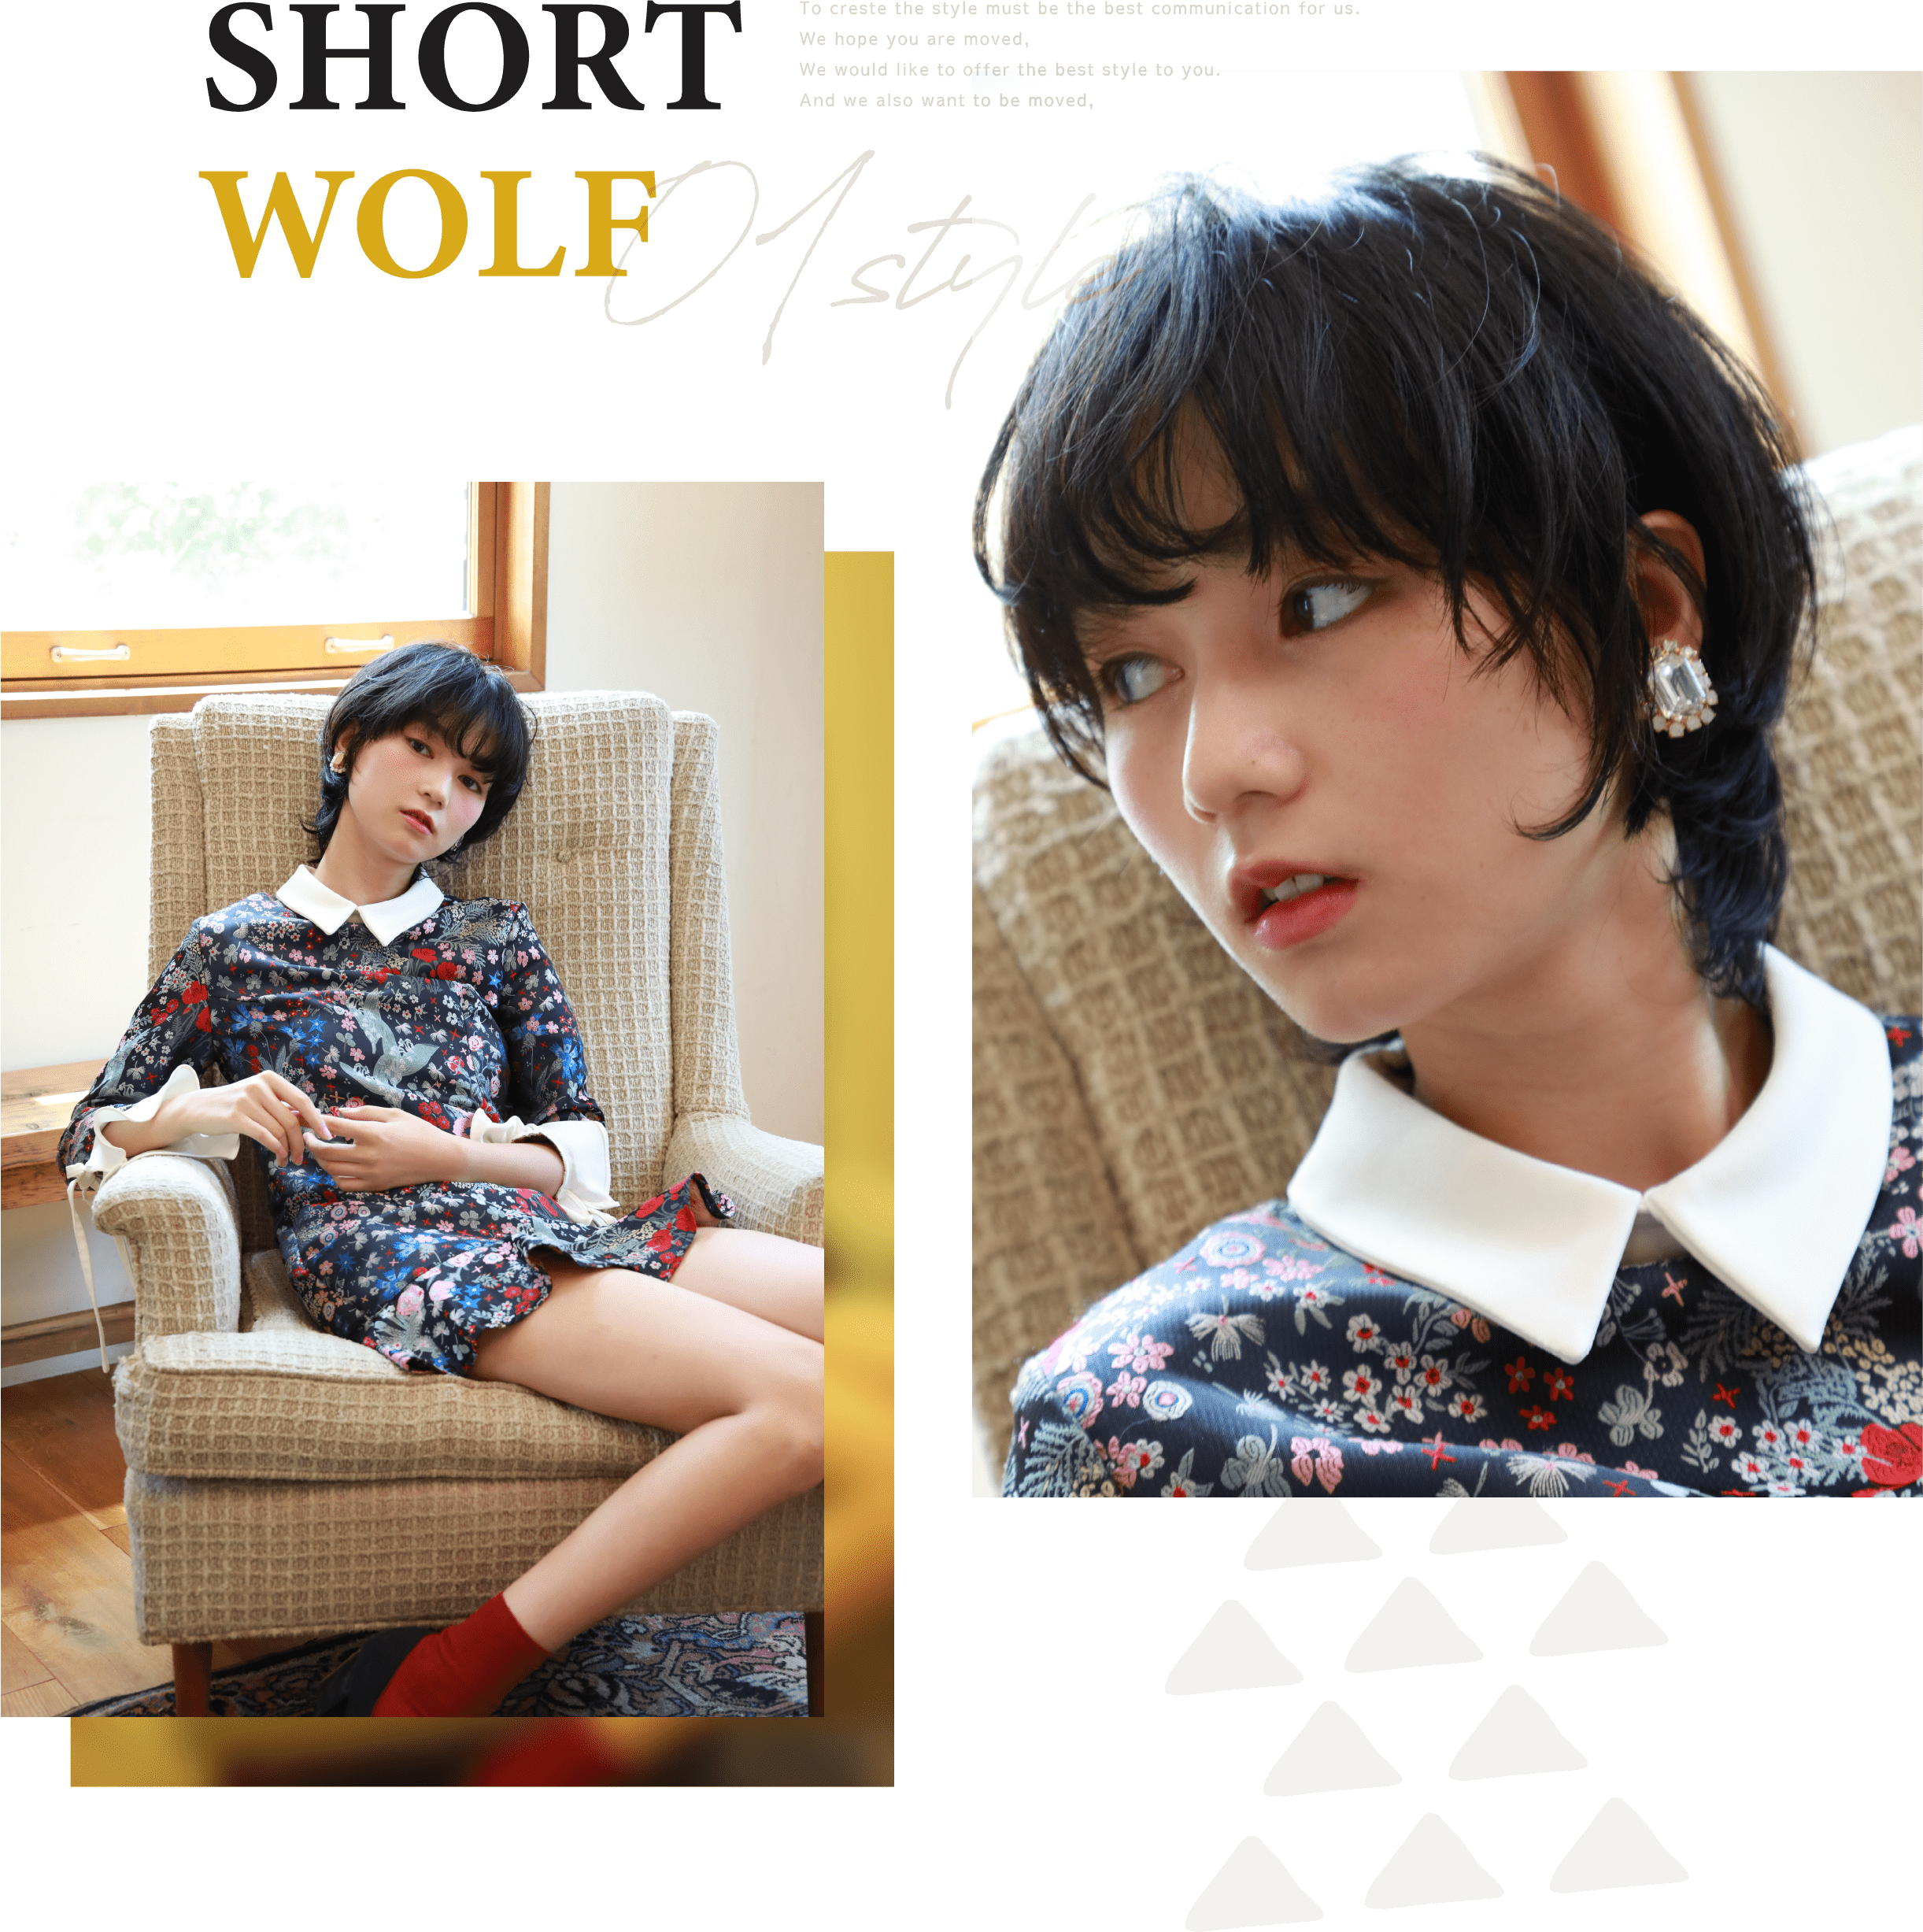 SHORT WOLF To creste the style must be the best communication for us. We hope you are moved, We would like to offer the best style to you. And we also want to be moved,